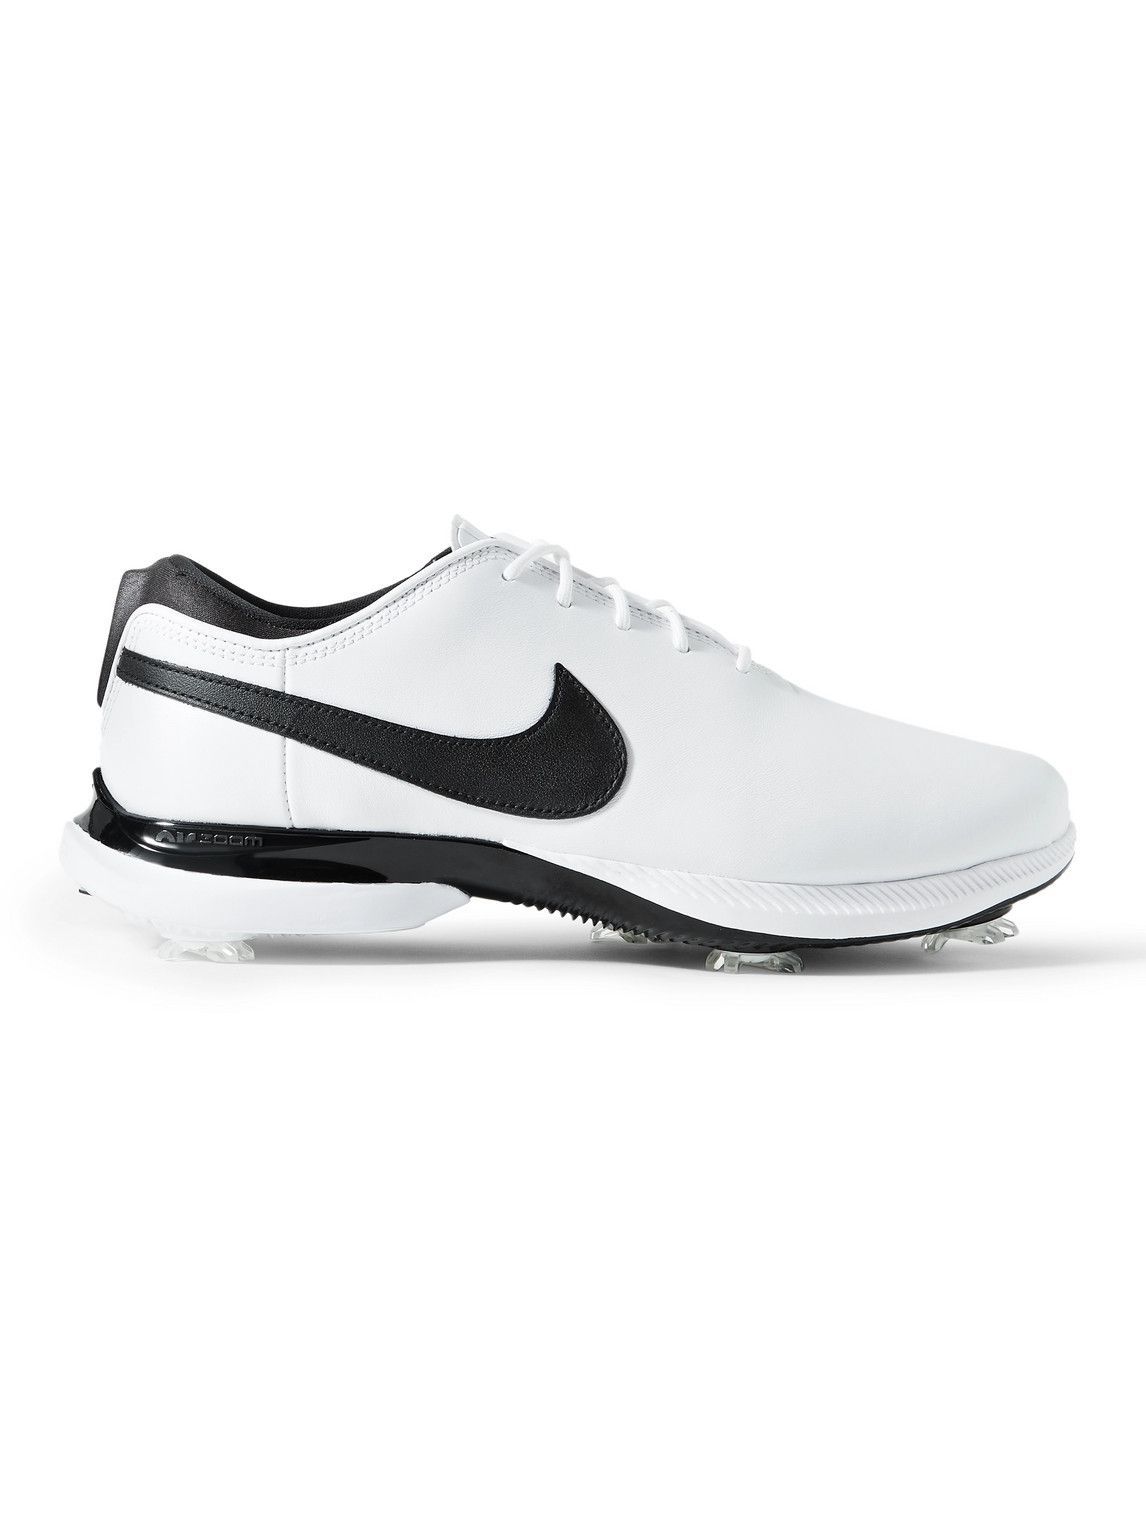 Nike Golf - Air Zoom Victory Tour 2 Leather Golf Shoes - White Nike Golf